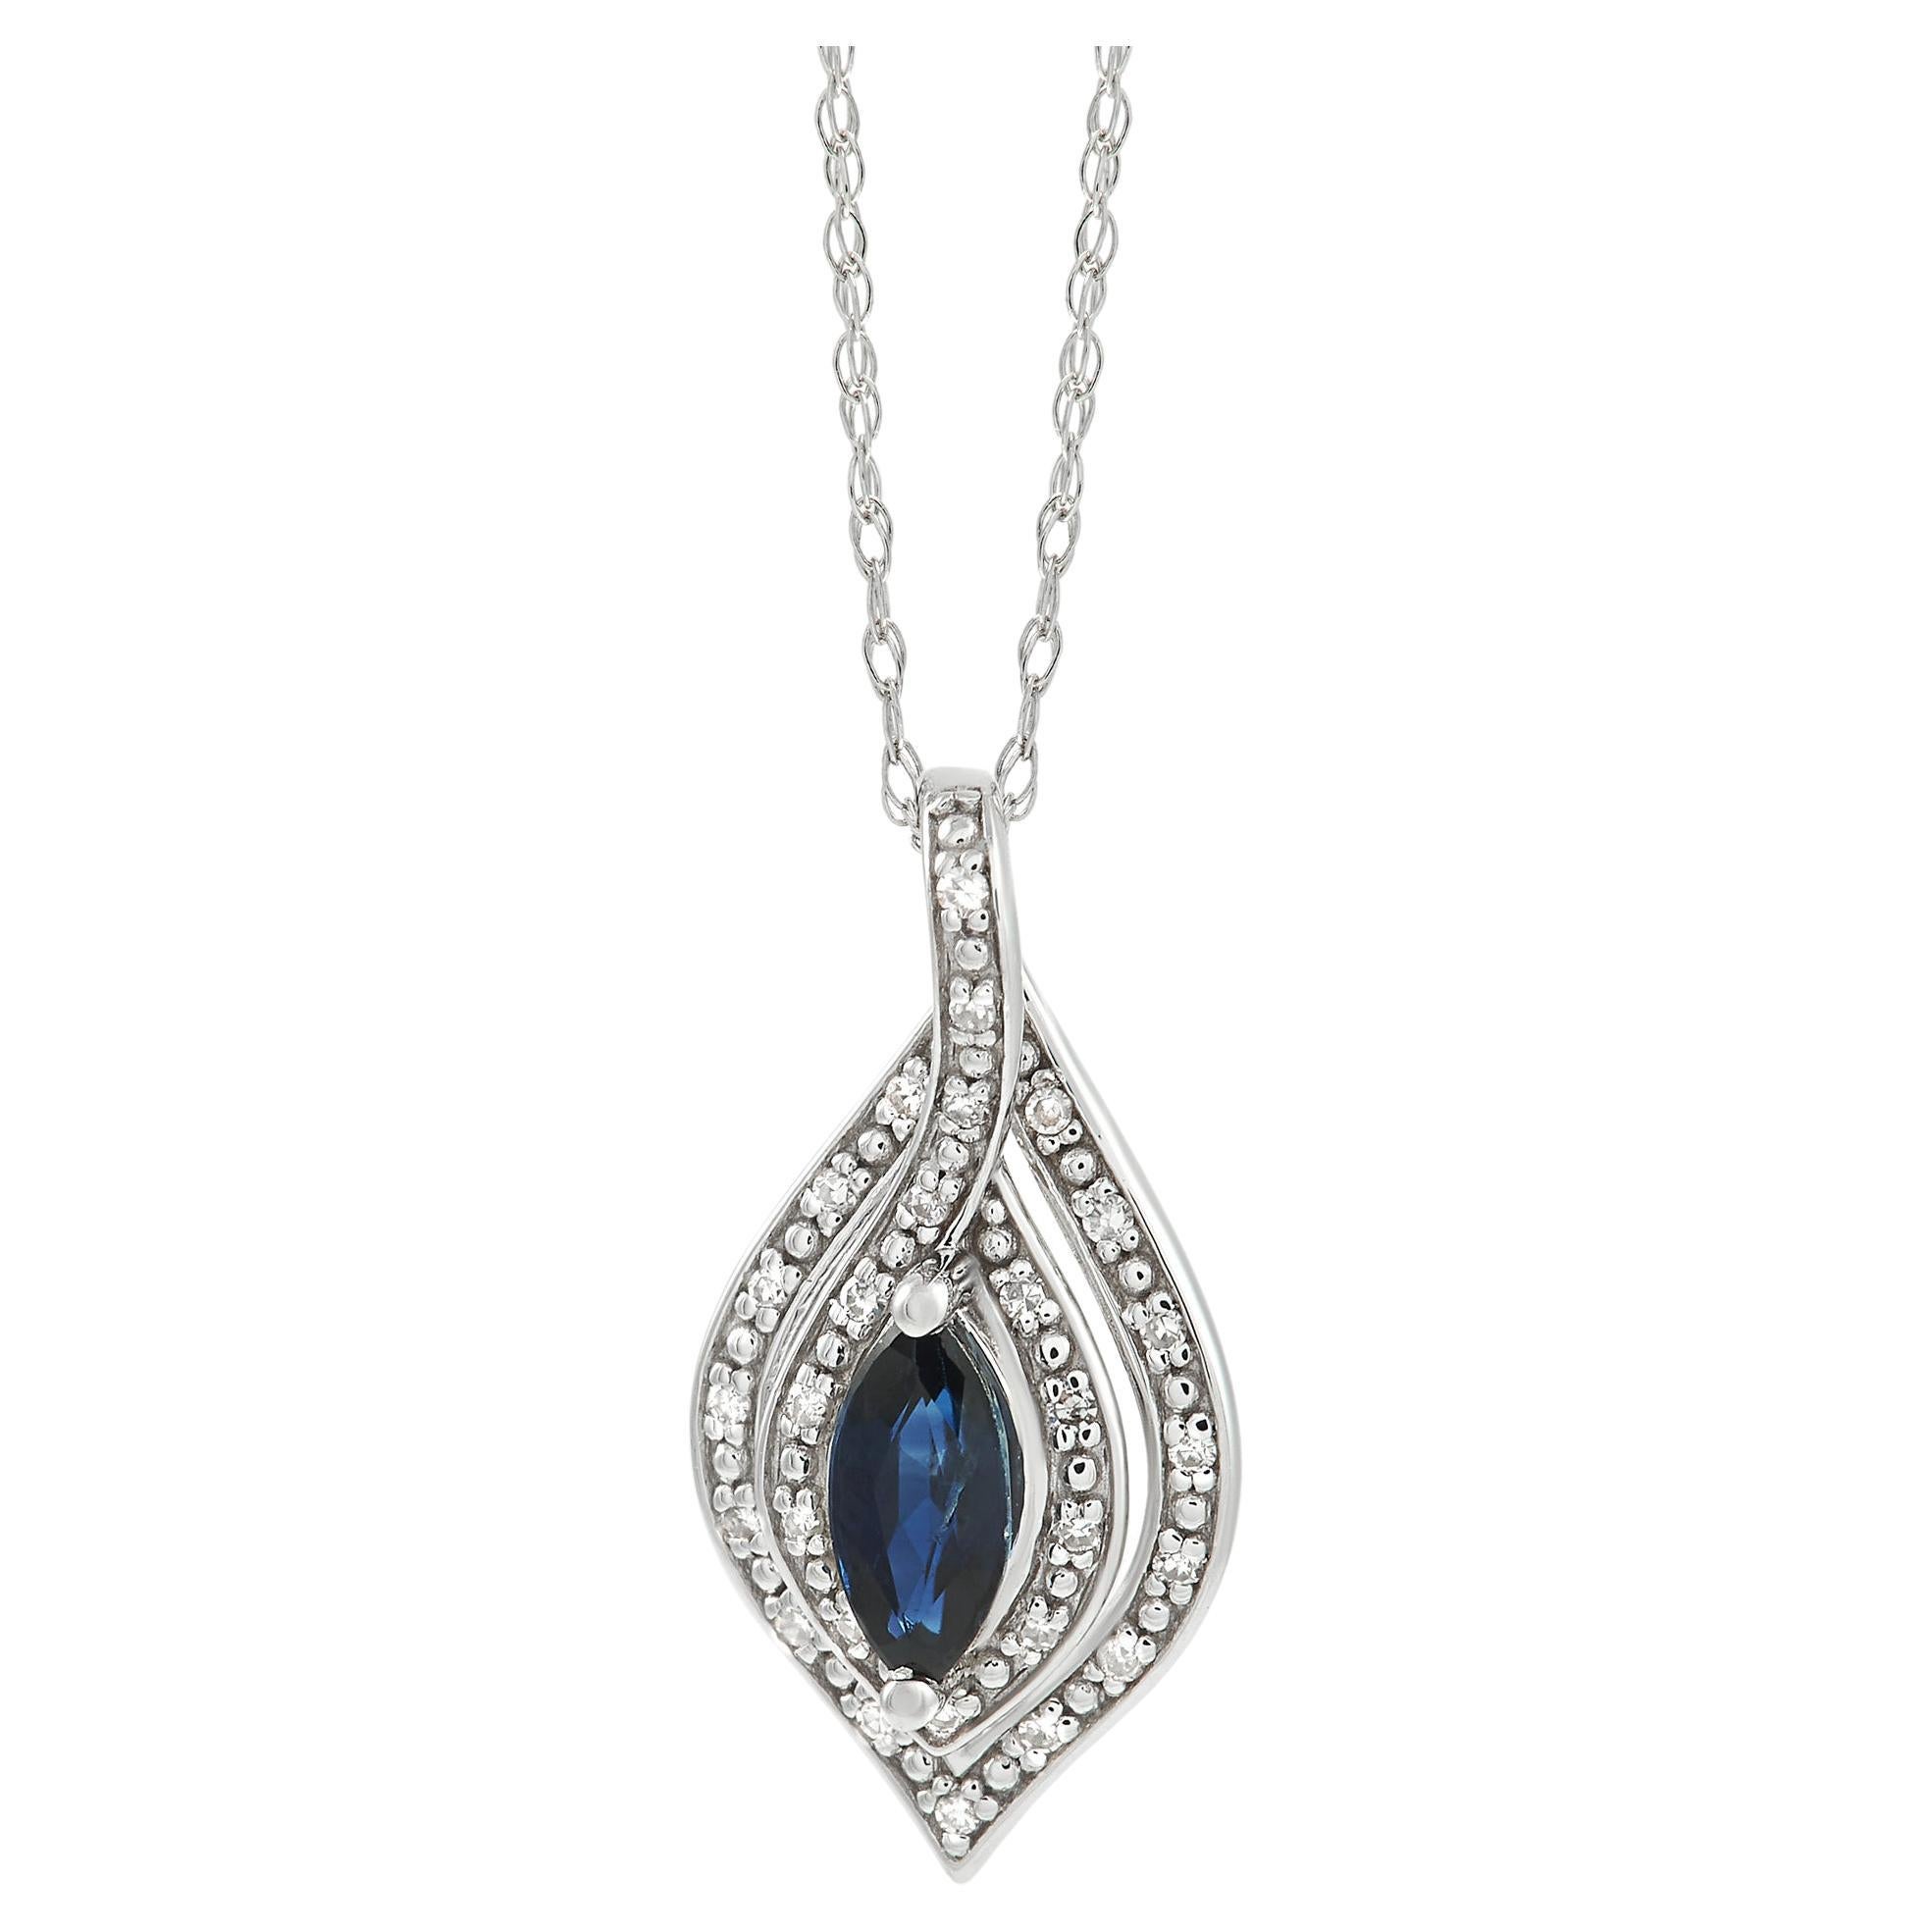 LB Exclusive 14K White Gold 0.08 Ct Diamond and Sapphire Necklace